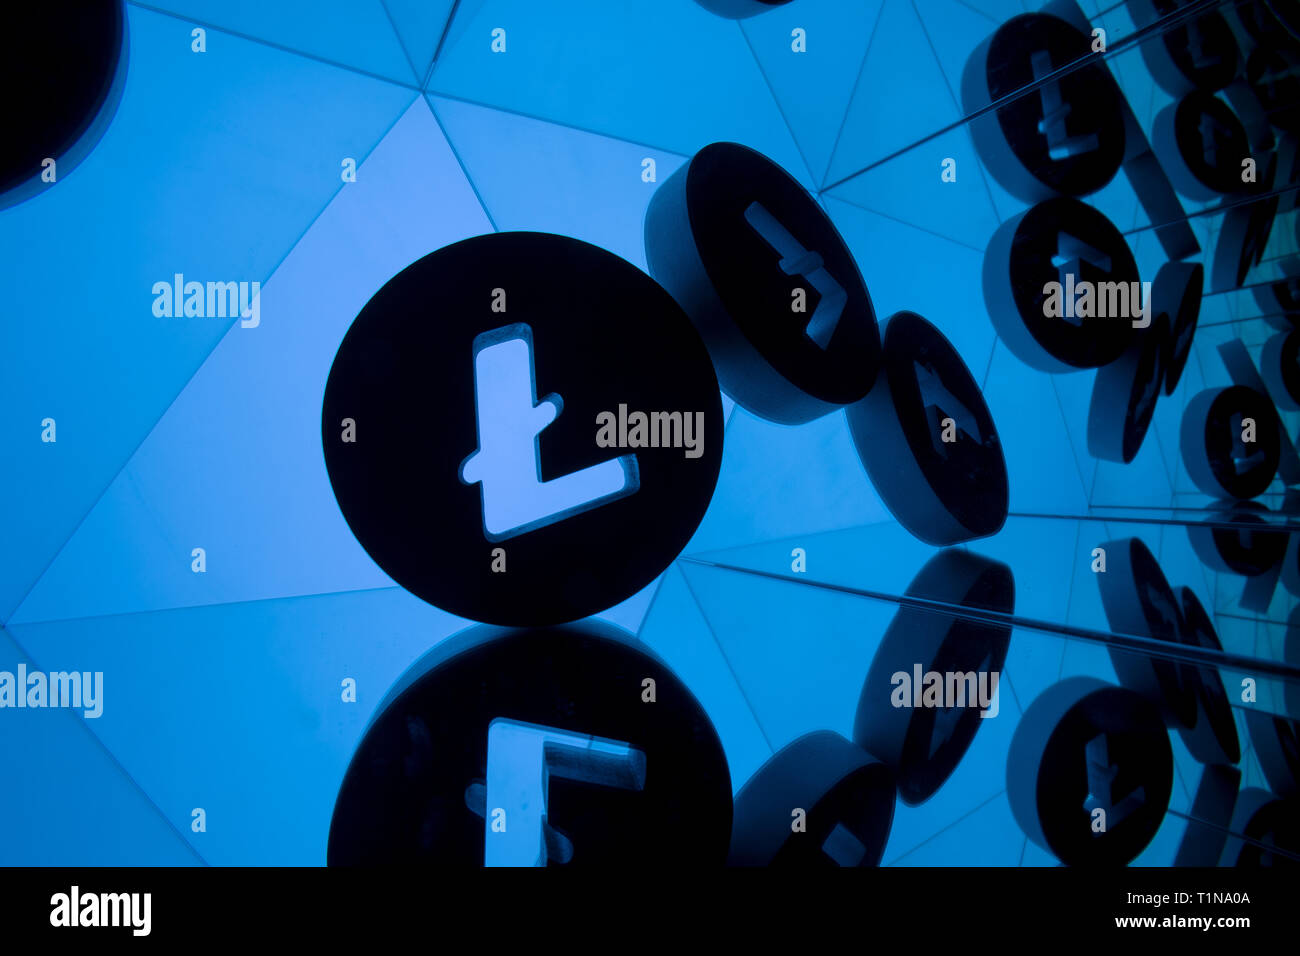 Litecoin Currency Symbol With Many Mirroring Images of Itself on Blue Background Stock Photo